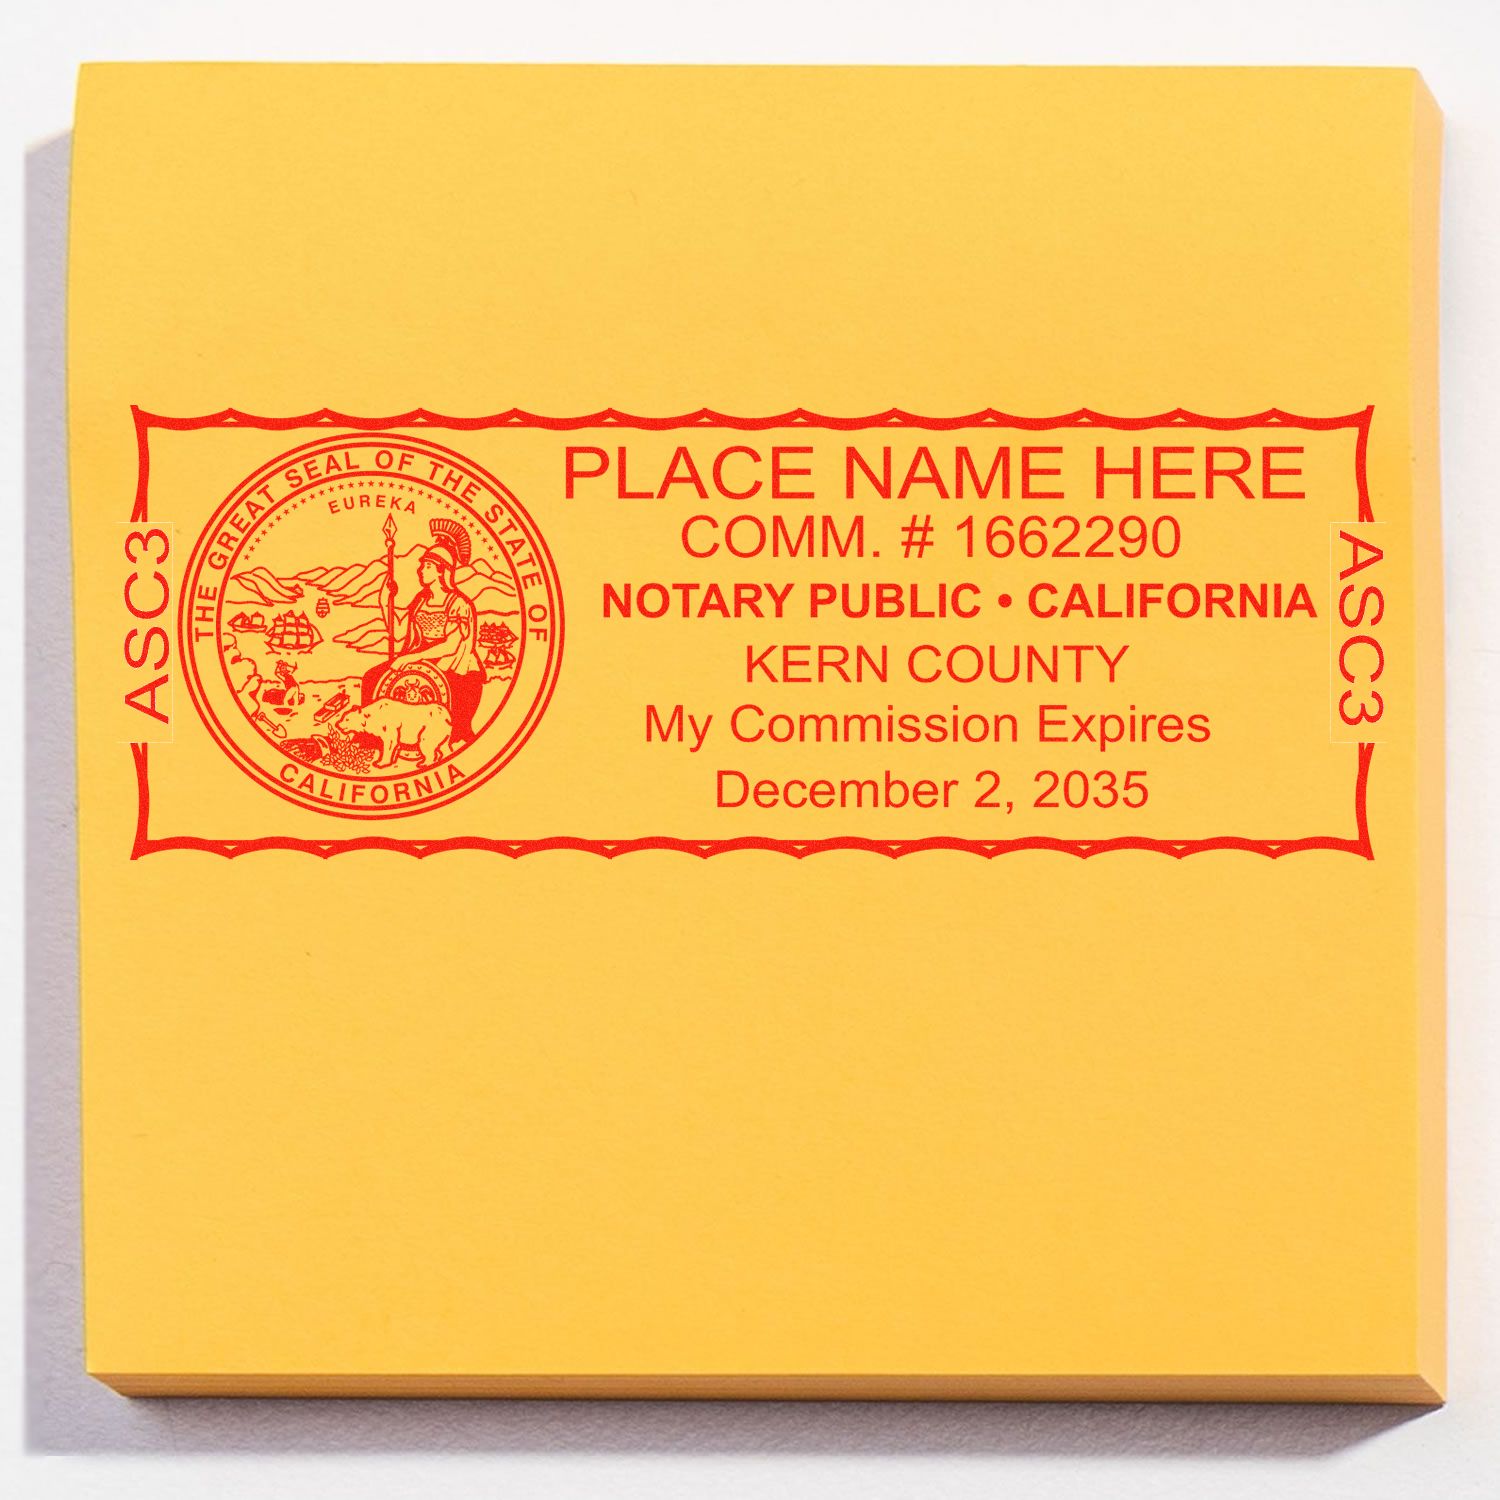 The main image for the PSI California Notary Stamp depicting a sample of the imprint and electronic files